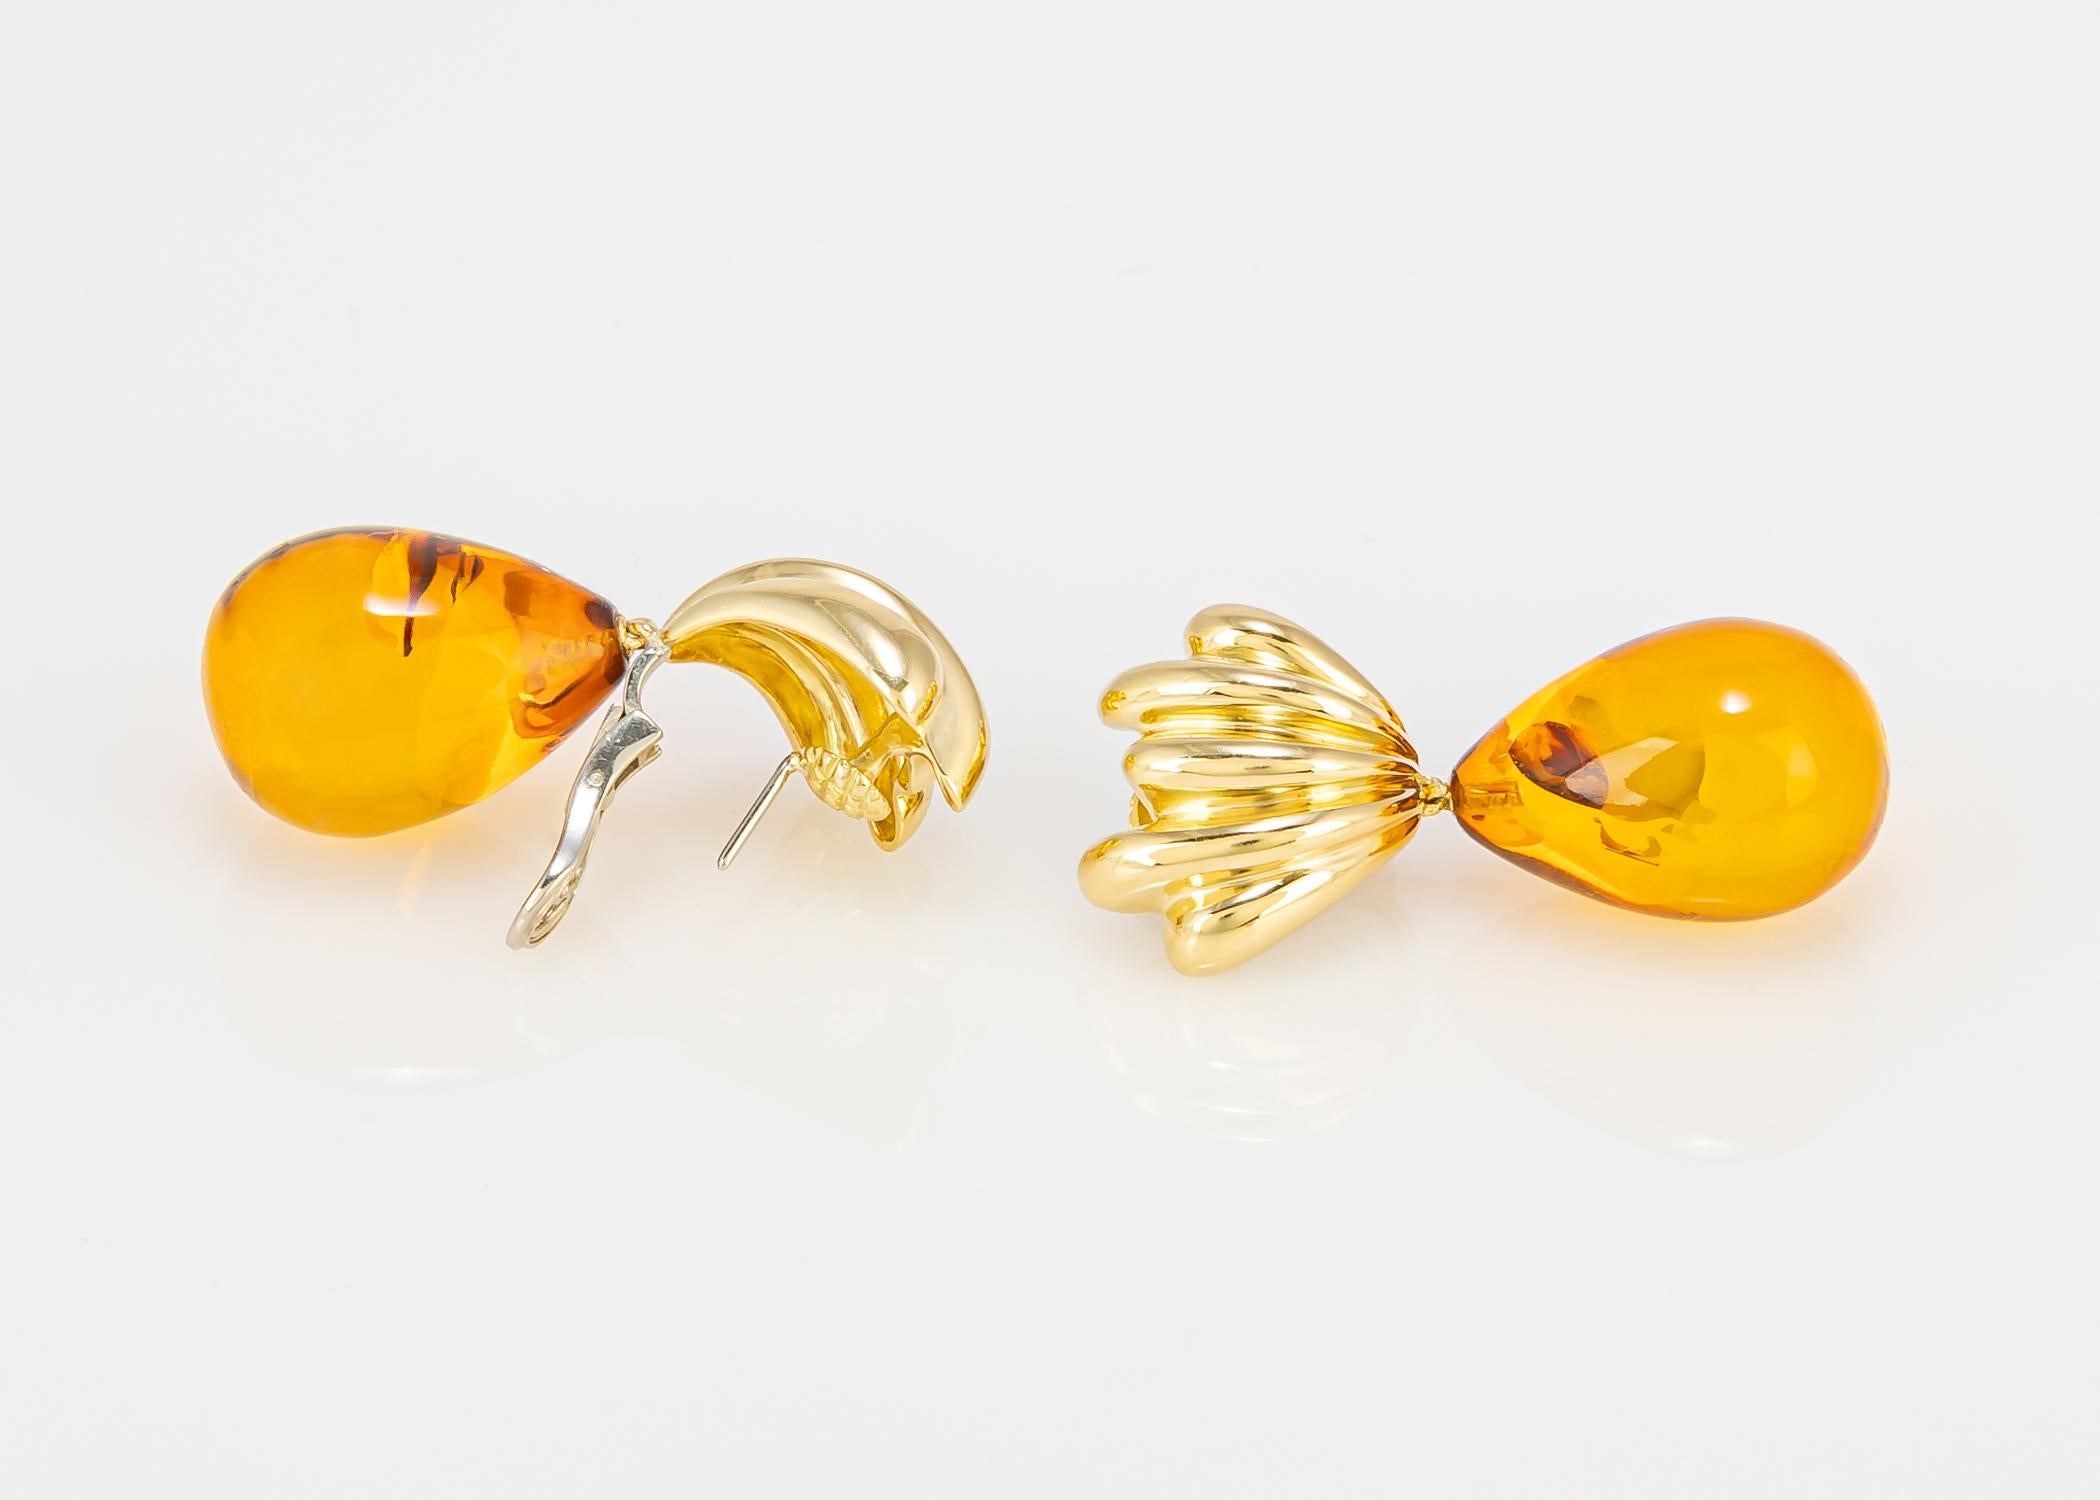 Tiffany & Co. designed an all the time pair of drop earrings with a twist. Still neutral but featuring amber drops that bring a bit of moonlight and sunshine to brighten up your day. 1 3/4's in length. Day to evening enjoyment.